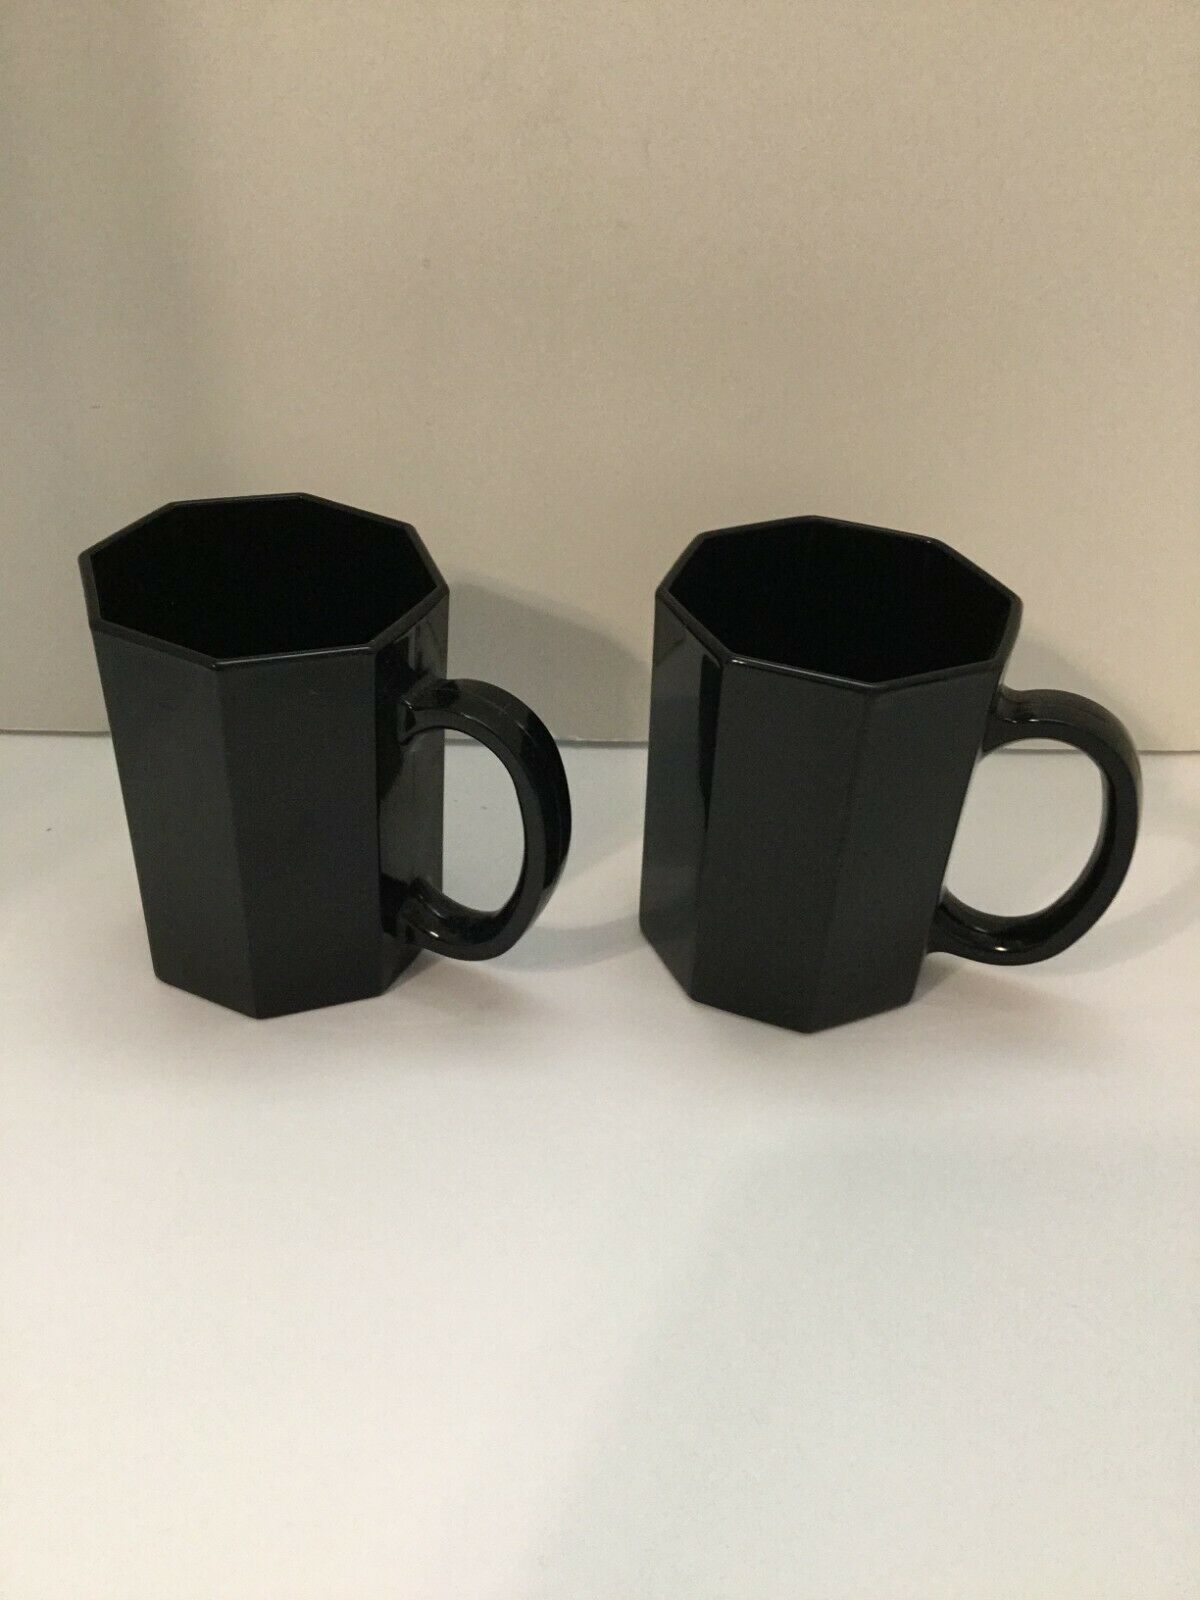 ARCOROC Octime Black Coffee Mug Octagonal Glass Made in France Set of 2